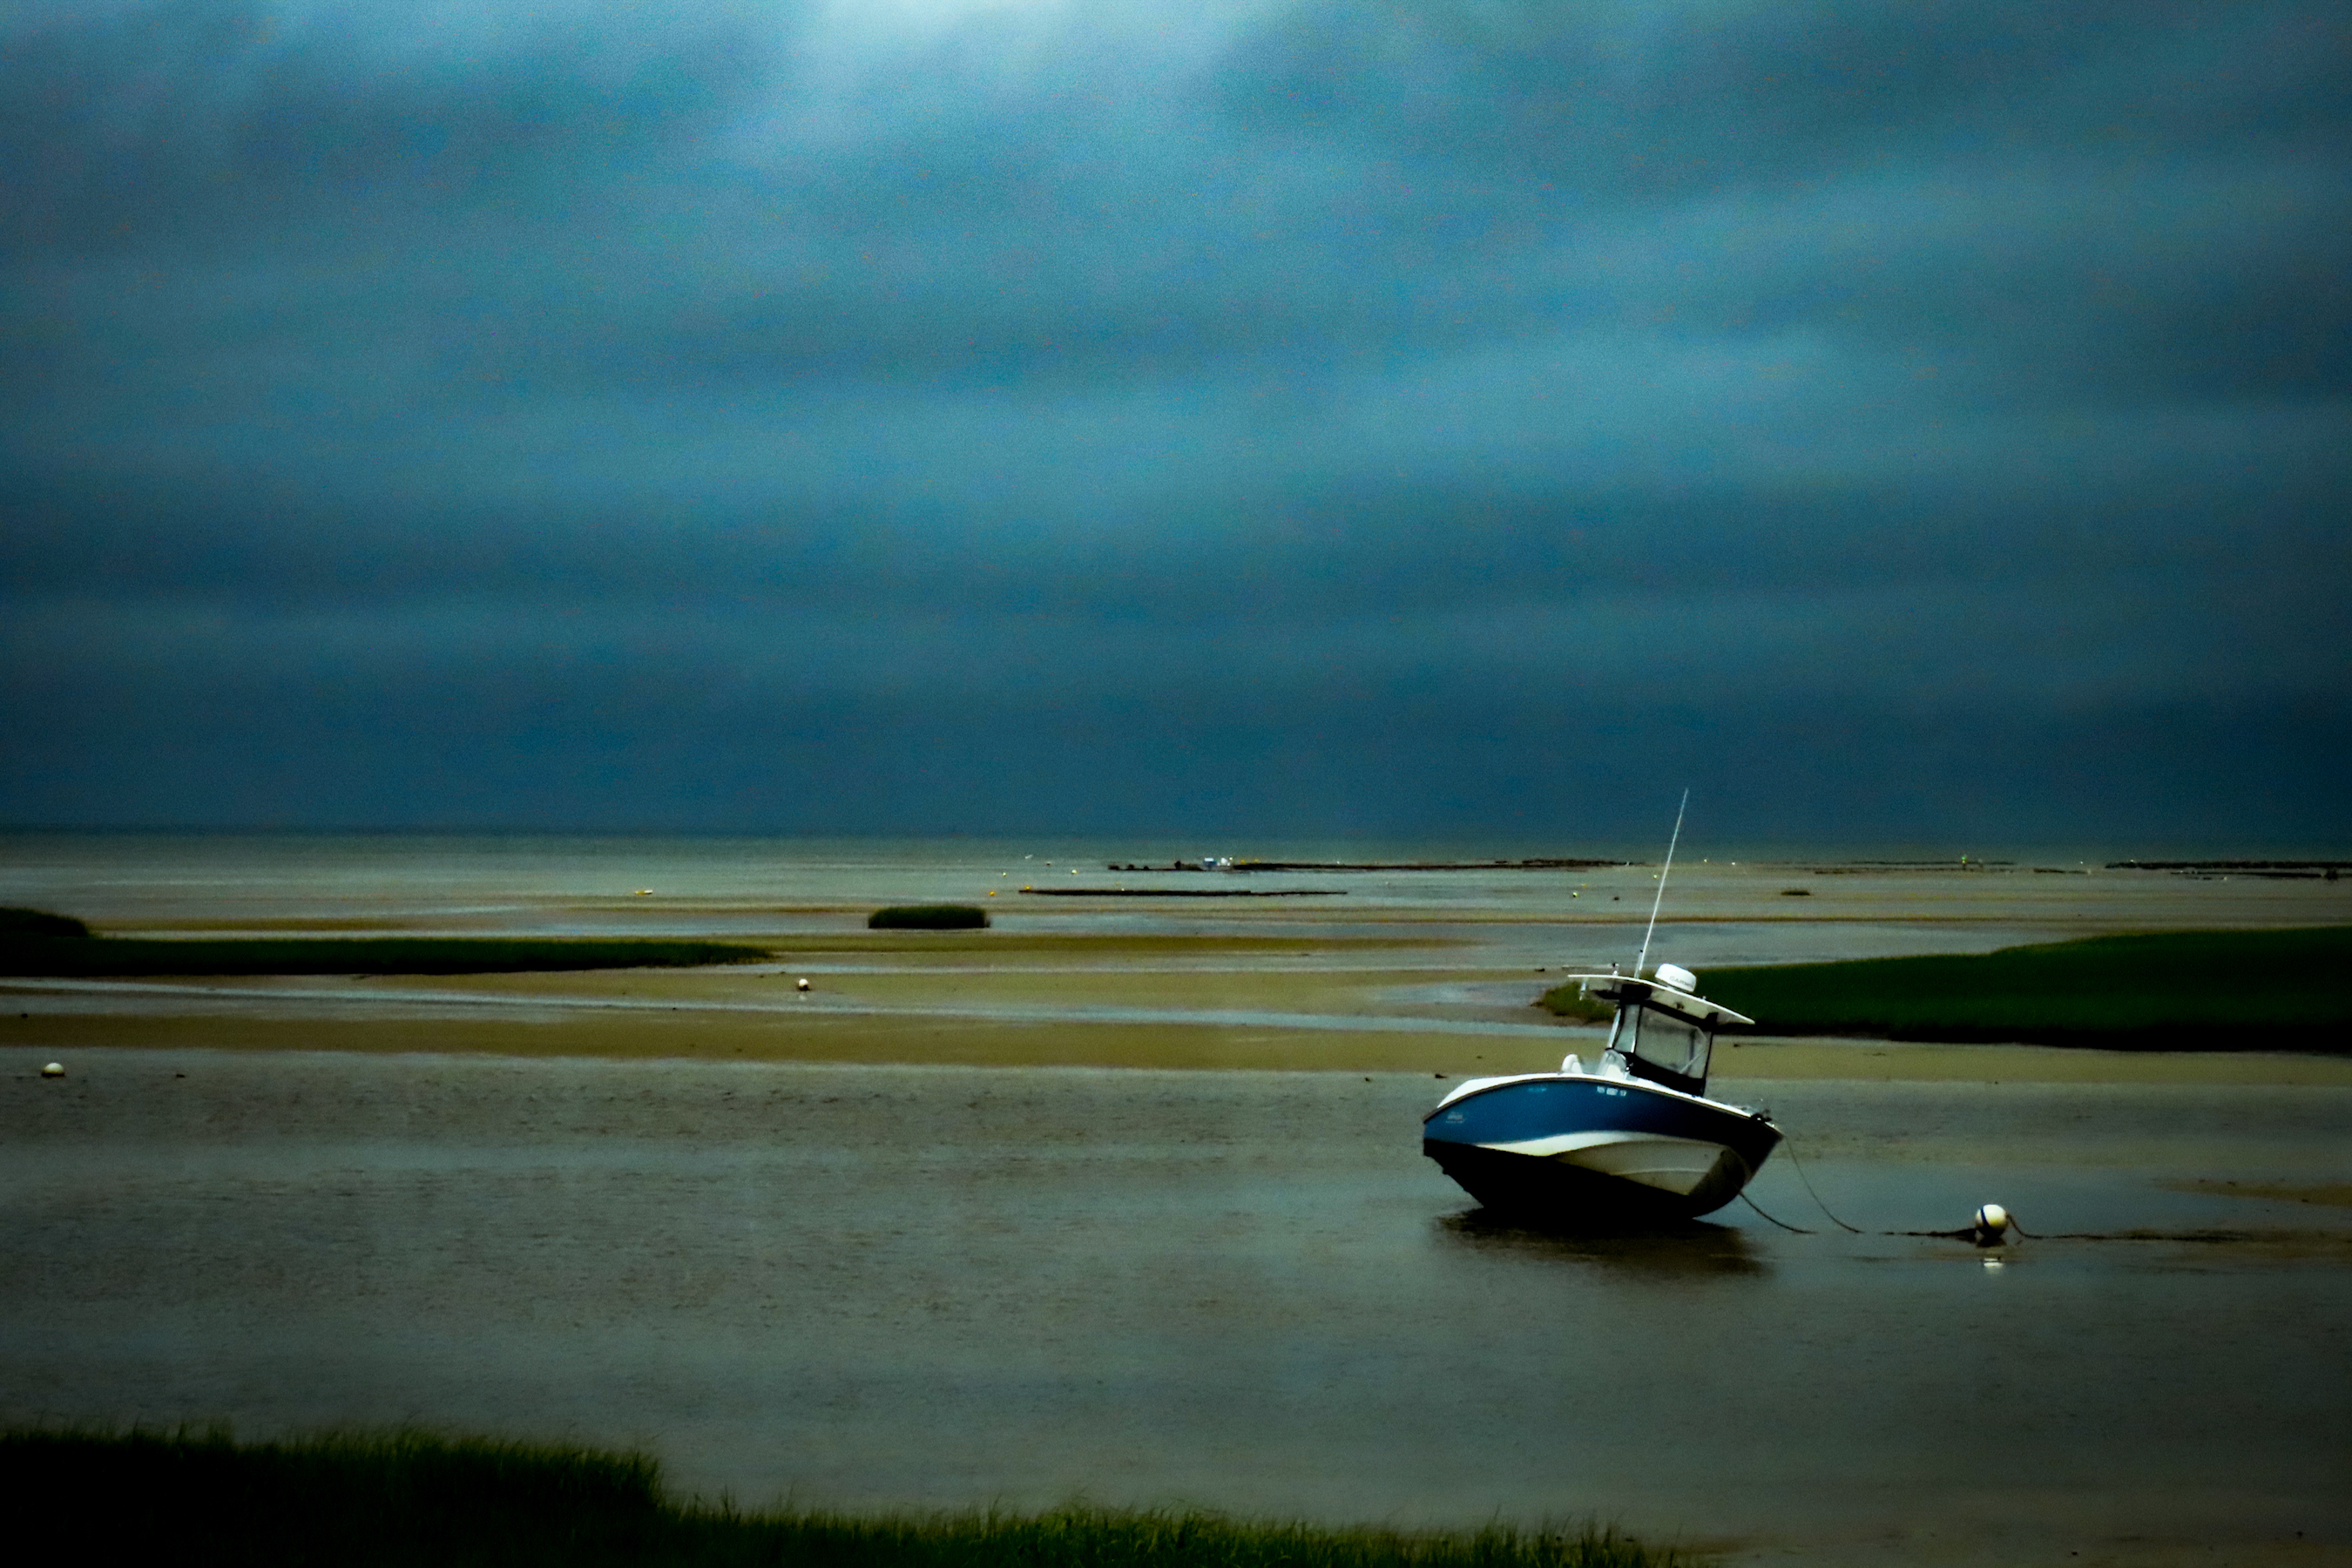 Photograph of a Stormy day on a cape cod Beach. The sky is dark gray and blue. A boat is tethered to an off shore mourning that is almost out of the water because the tide is so low. 